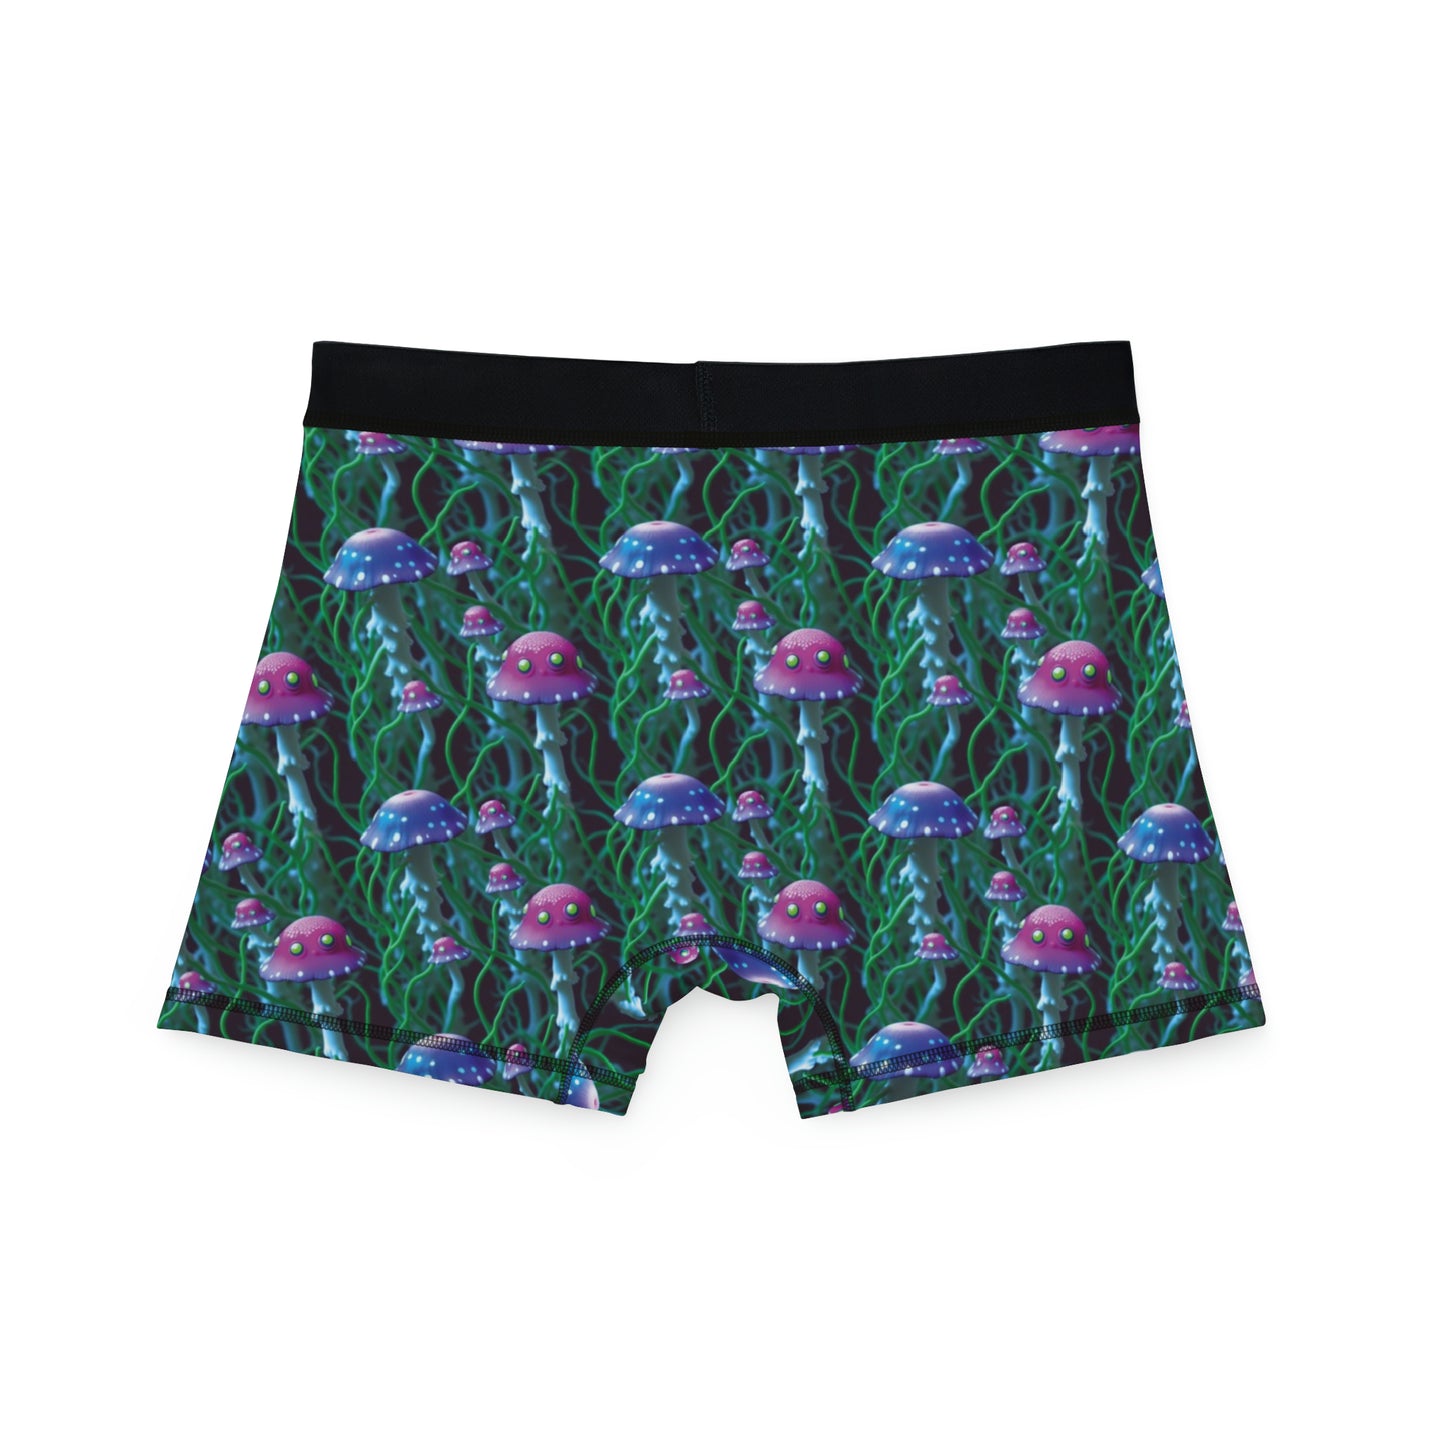 Fungal Tangle Boxer Briefs